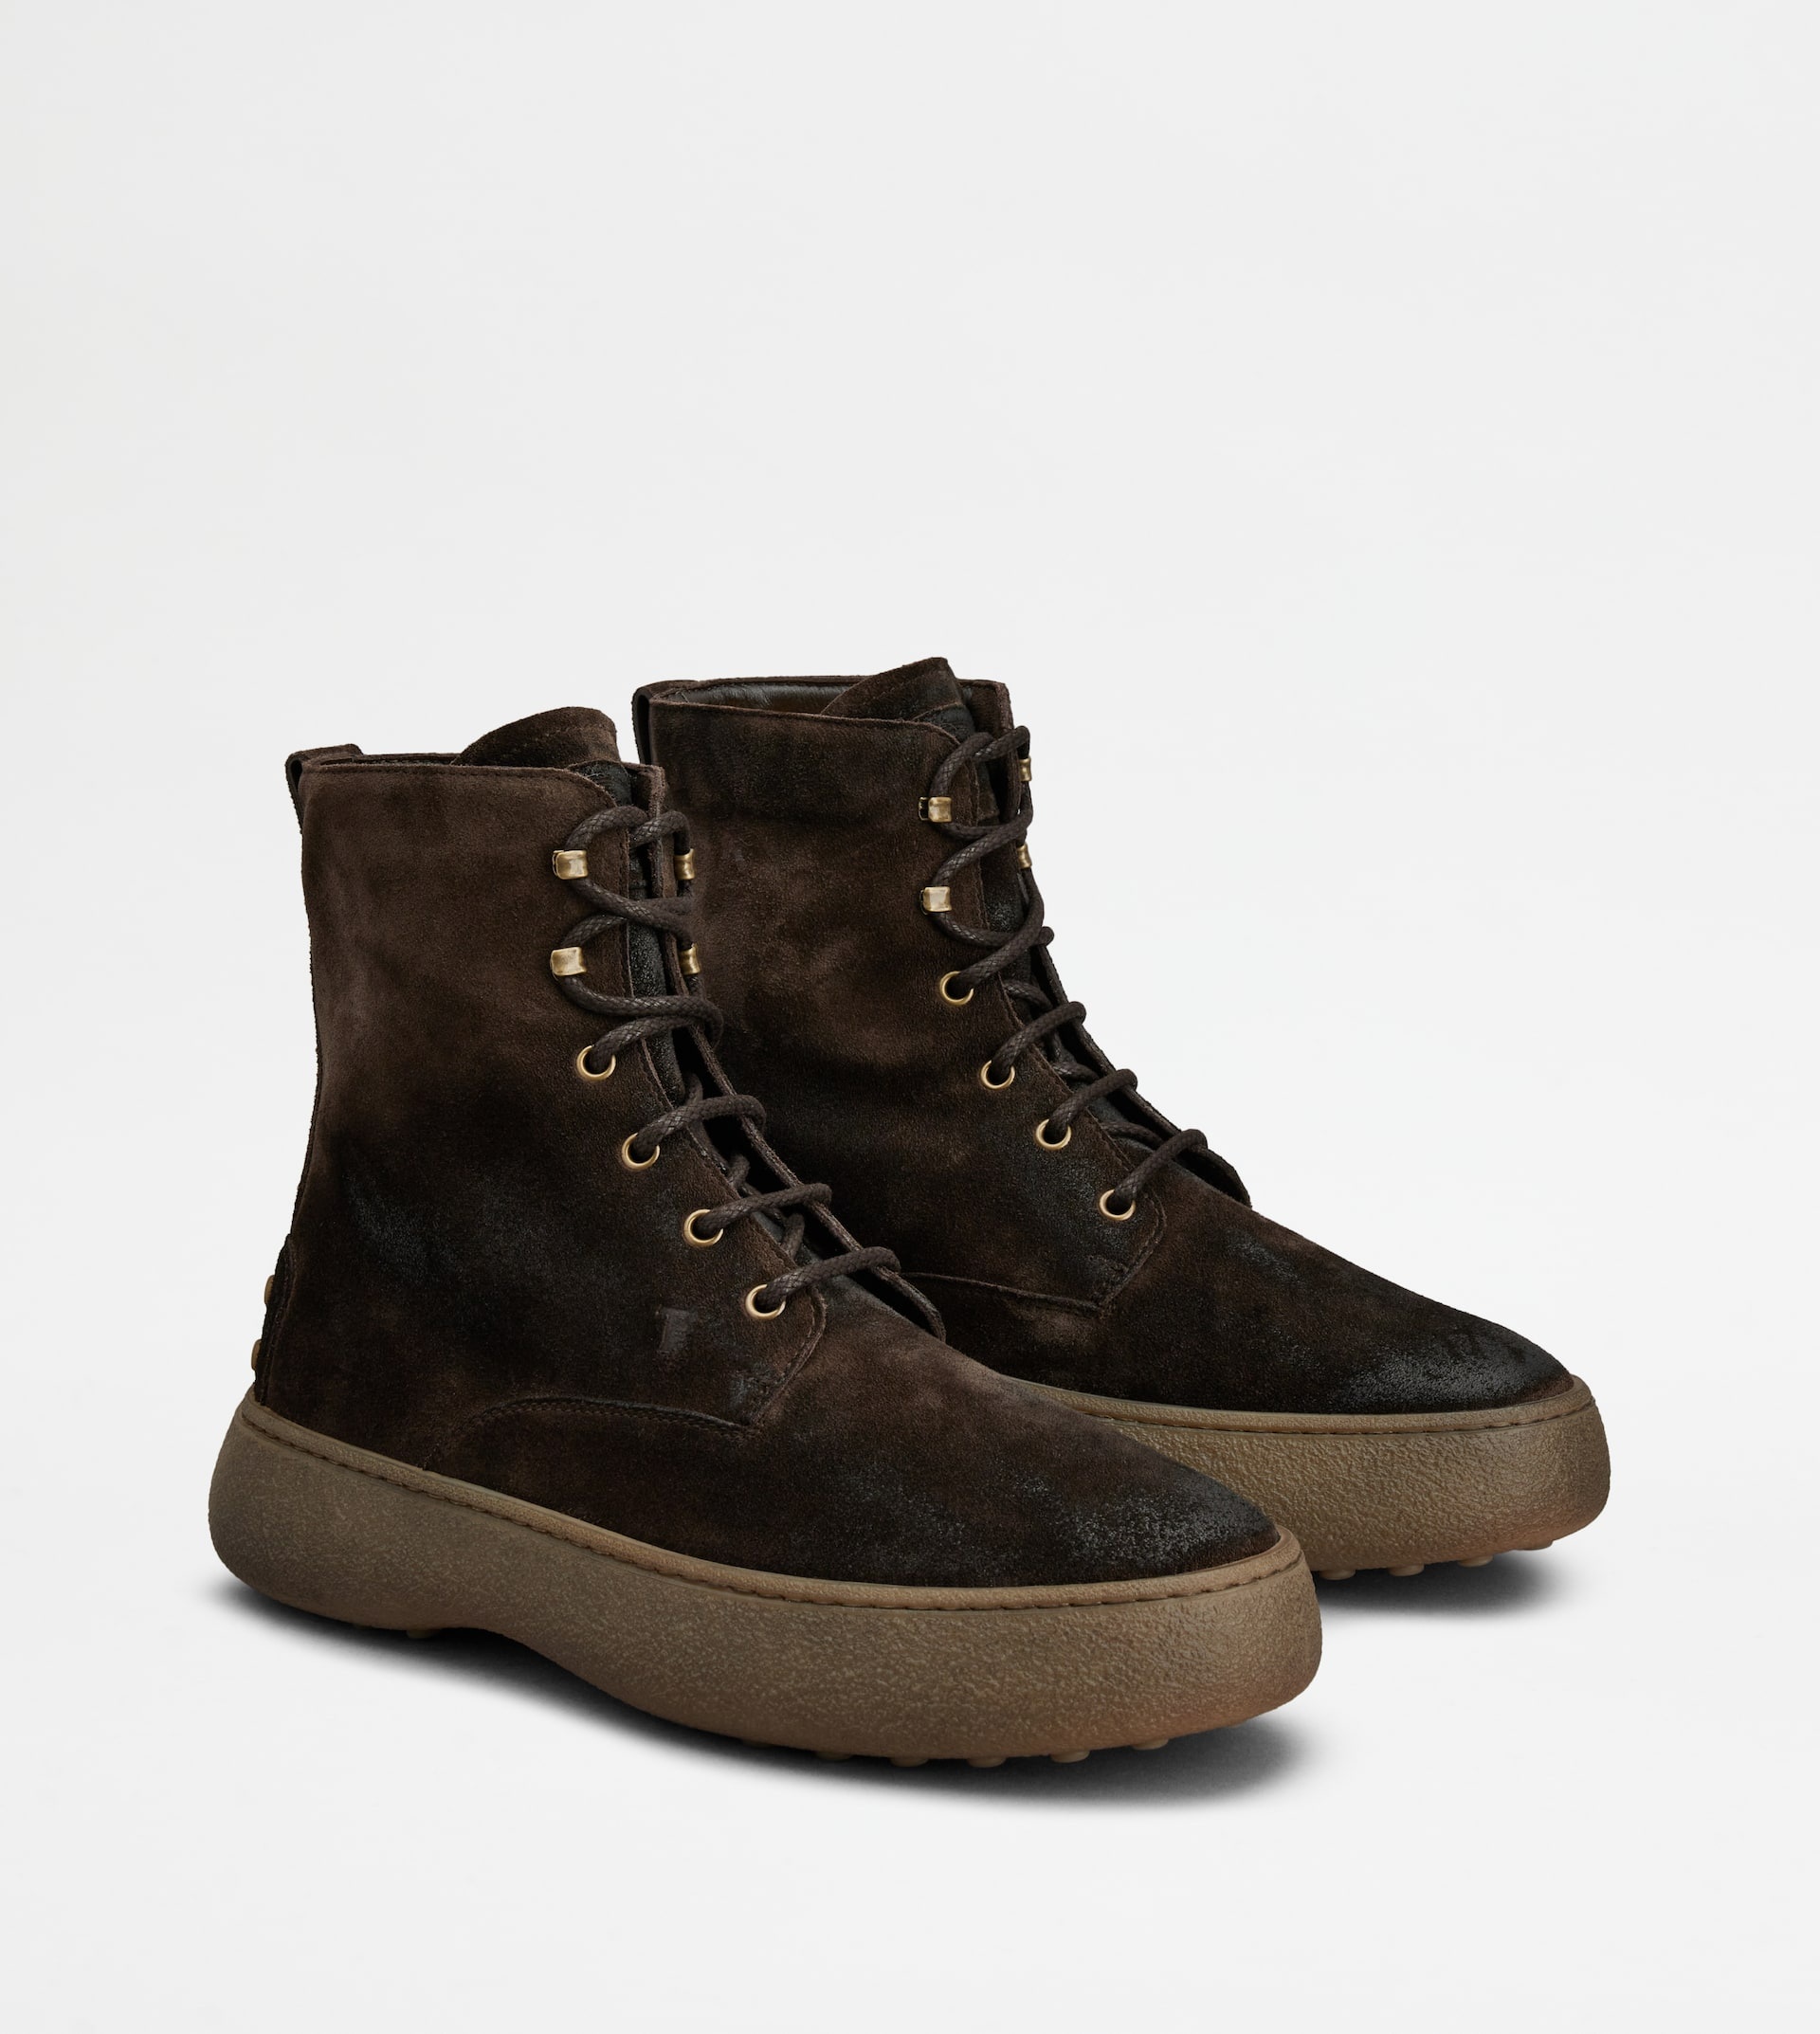 TOD'S W. G. LACE-UP ANKLE BOOTS IN SUEDE - BROWN - 3